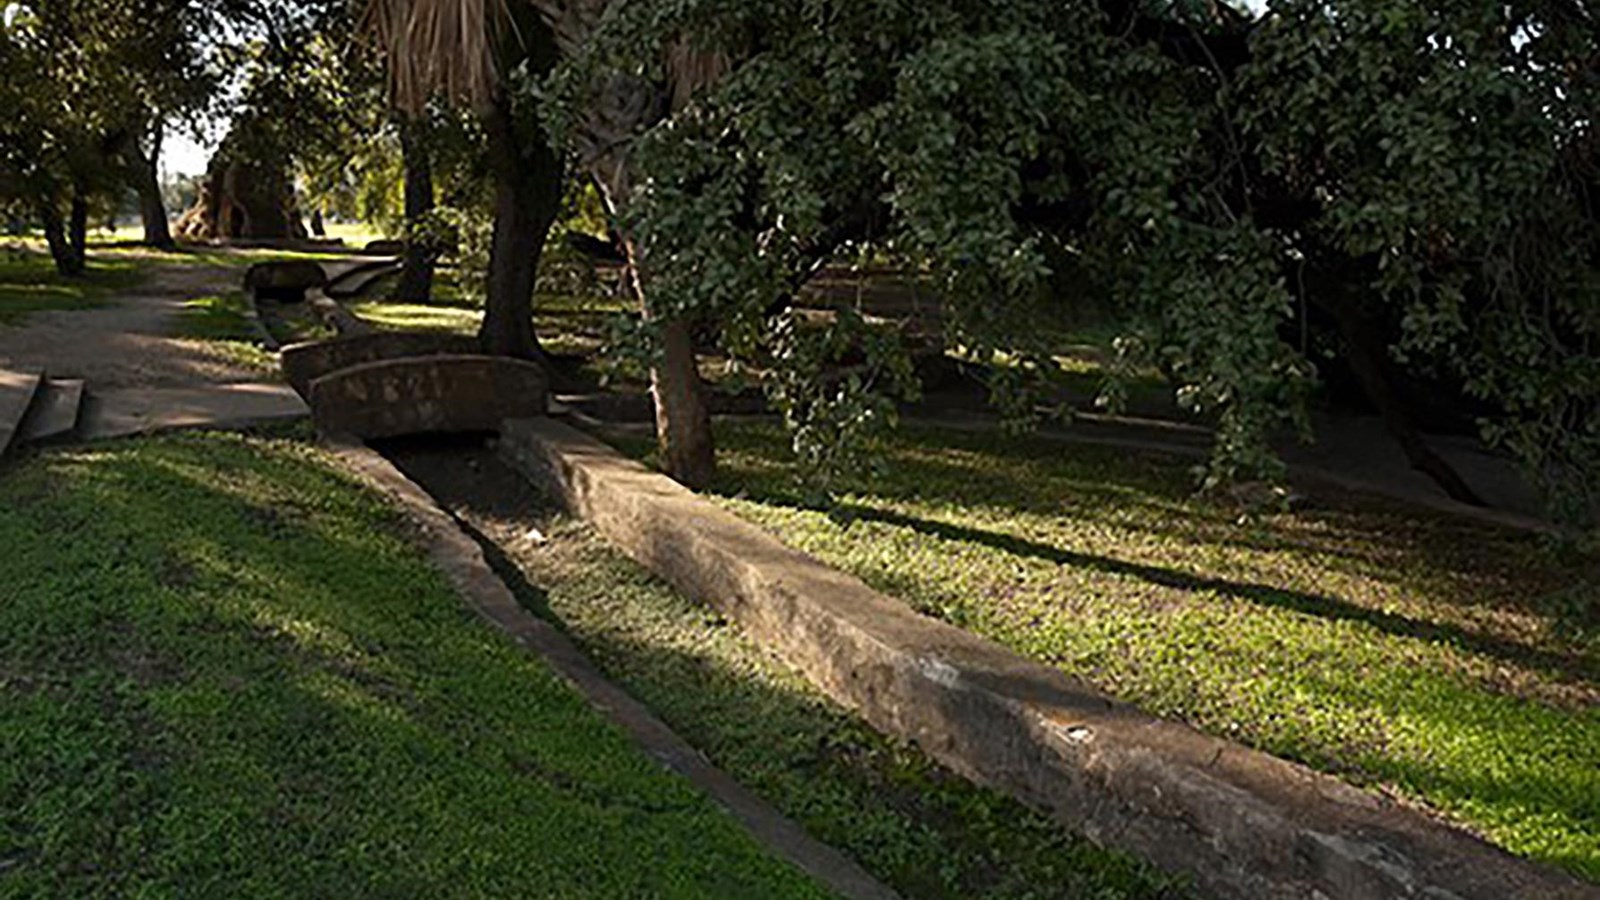 An aqueduct  in a grassy area with shrubs and palm trees.